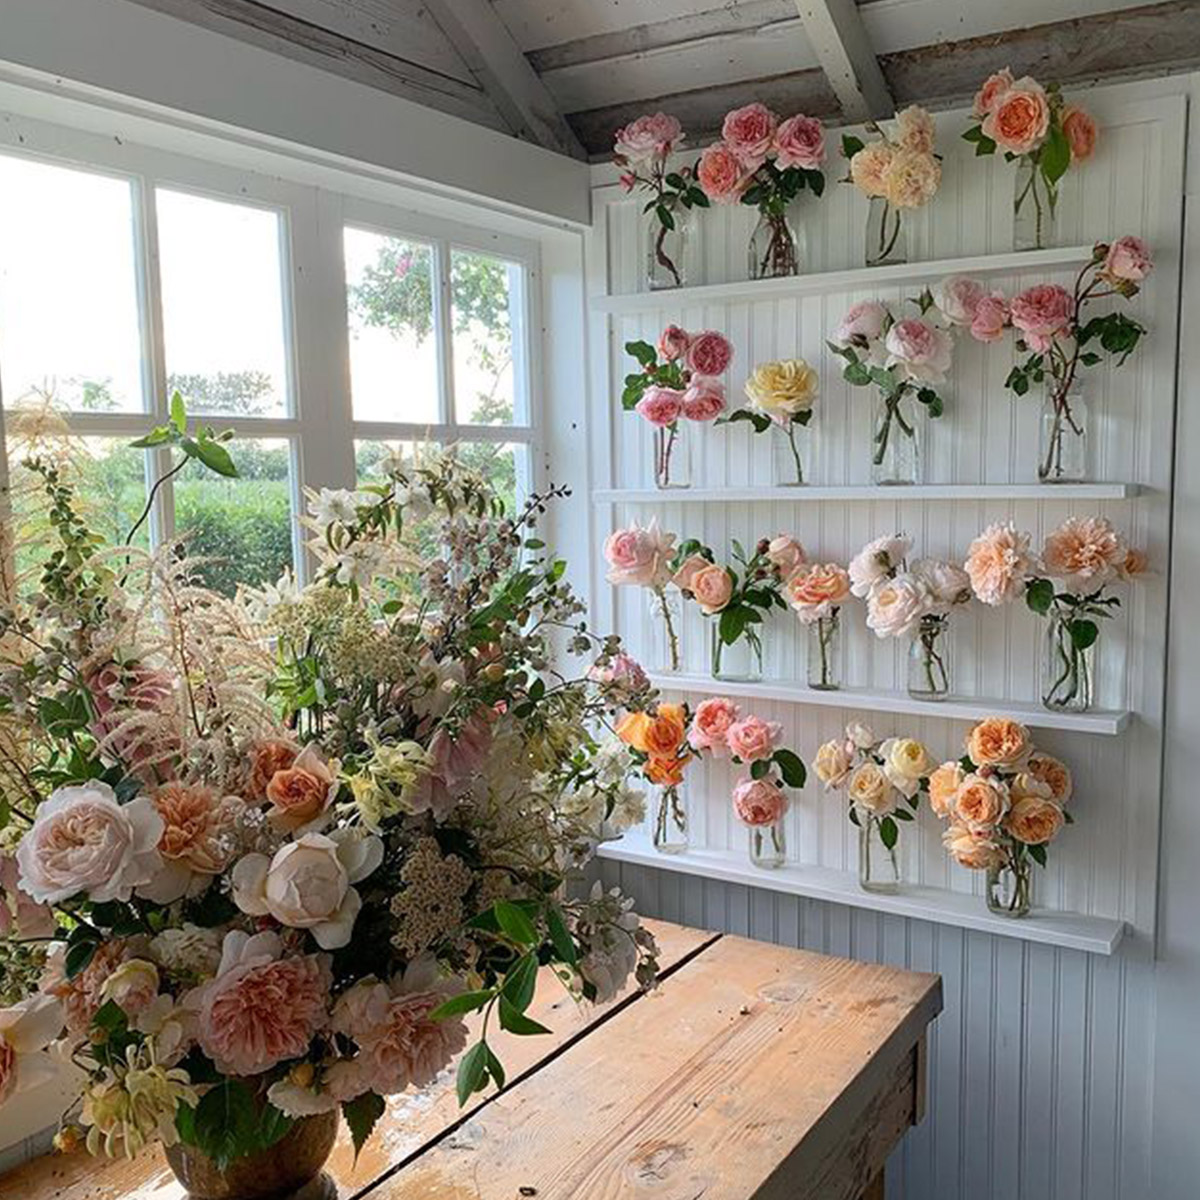 Local Farmer-Florists Are Blooming 31 Floret Flower Farm